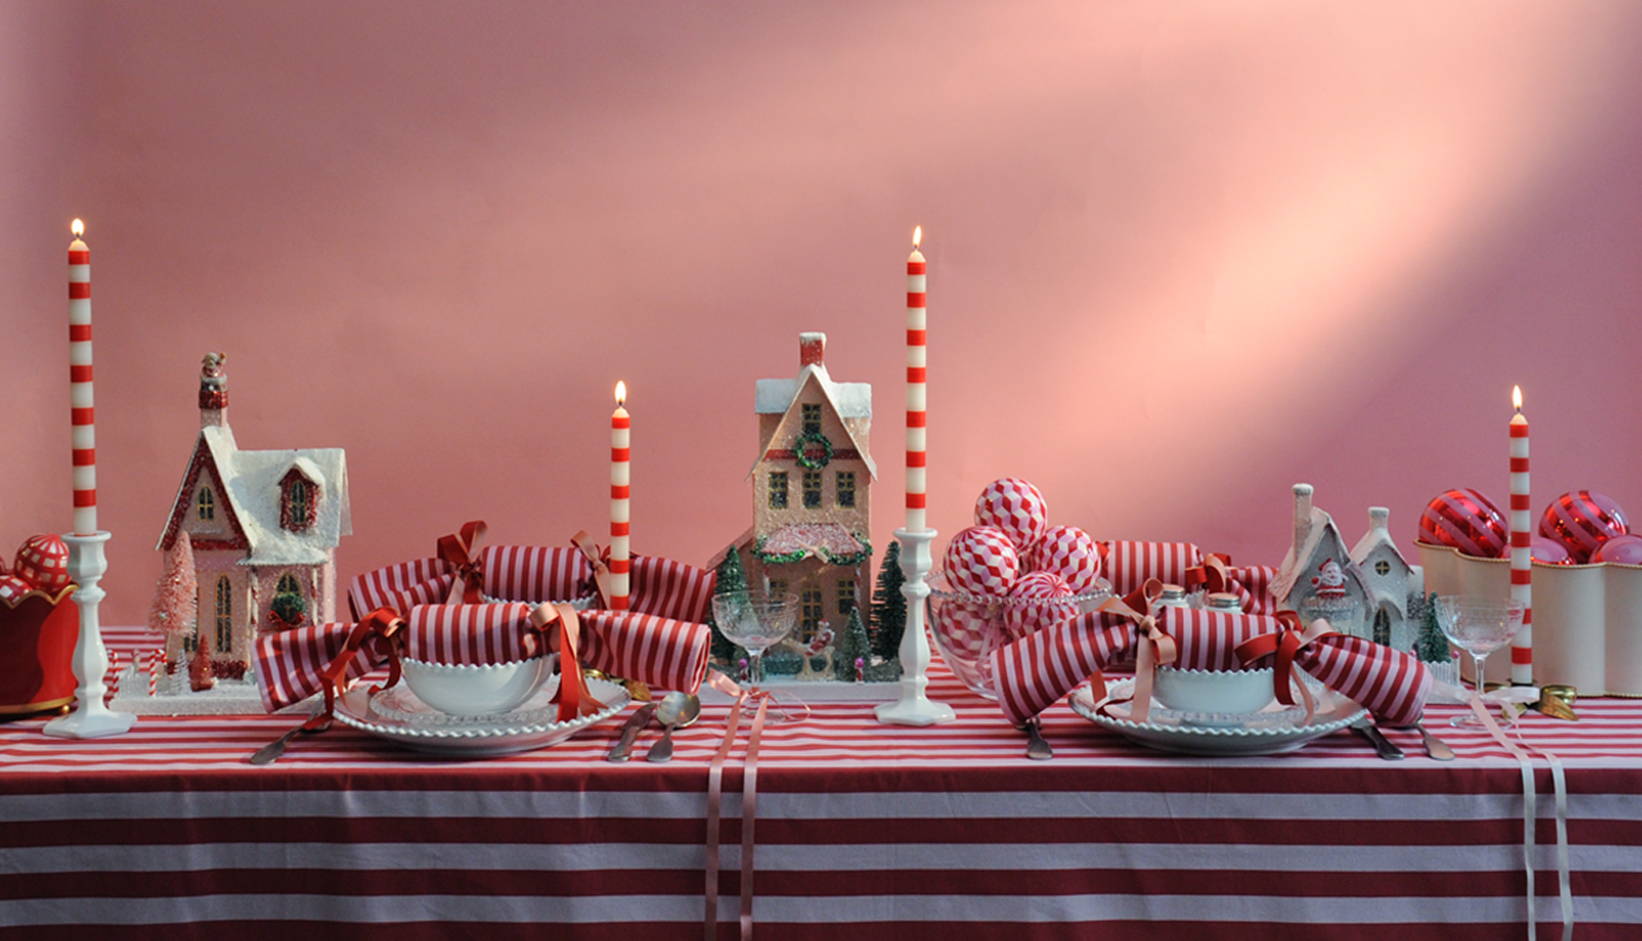 A wide image of a pink and red chirstmas laid table. With candles, crackers and christmas houses.